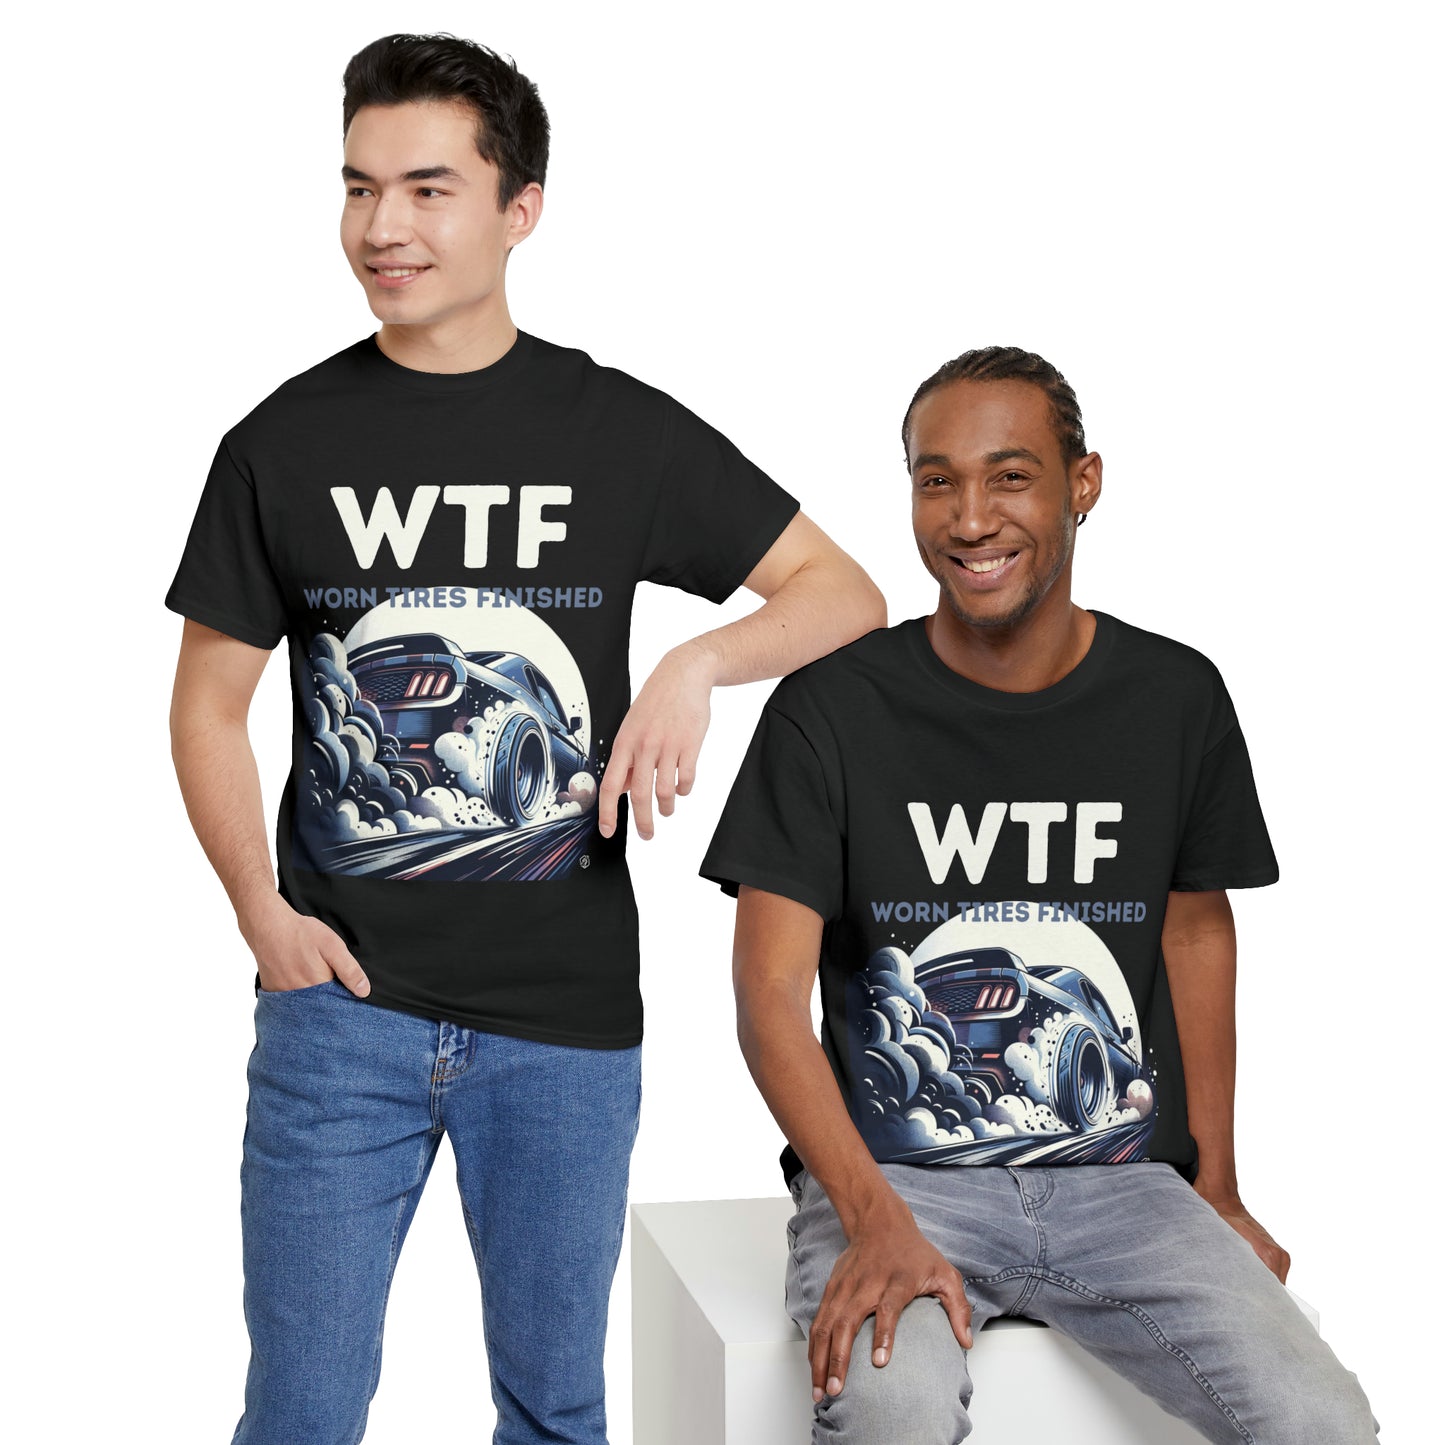 WTF - Worn Tires Finished Burnout Unisex Heavy Cotton Tee